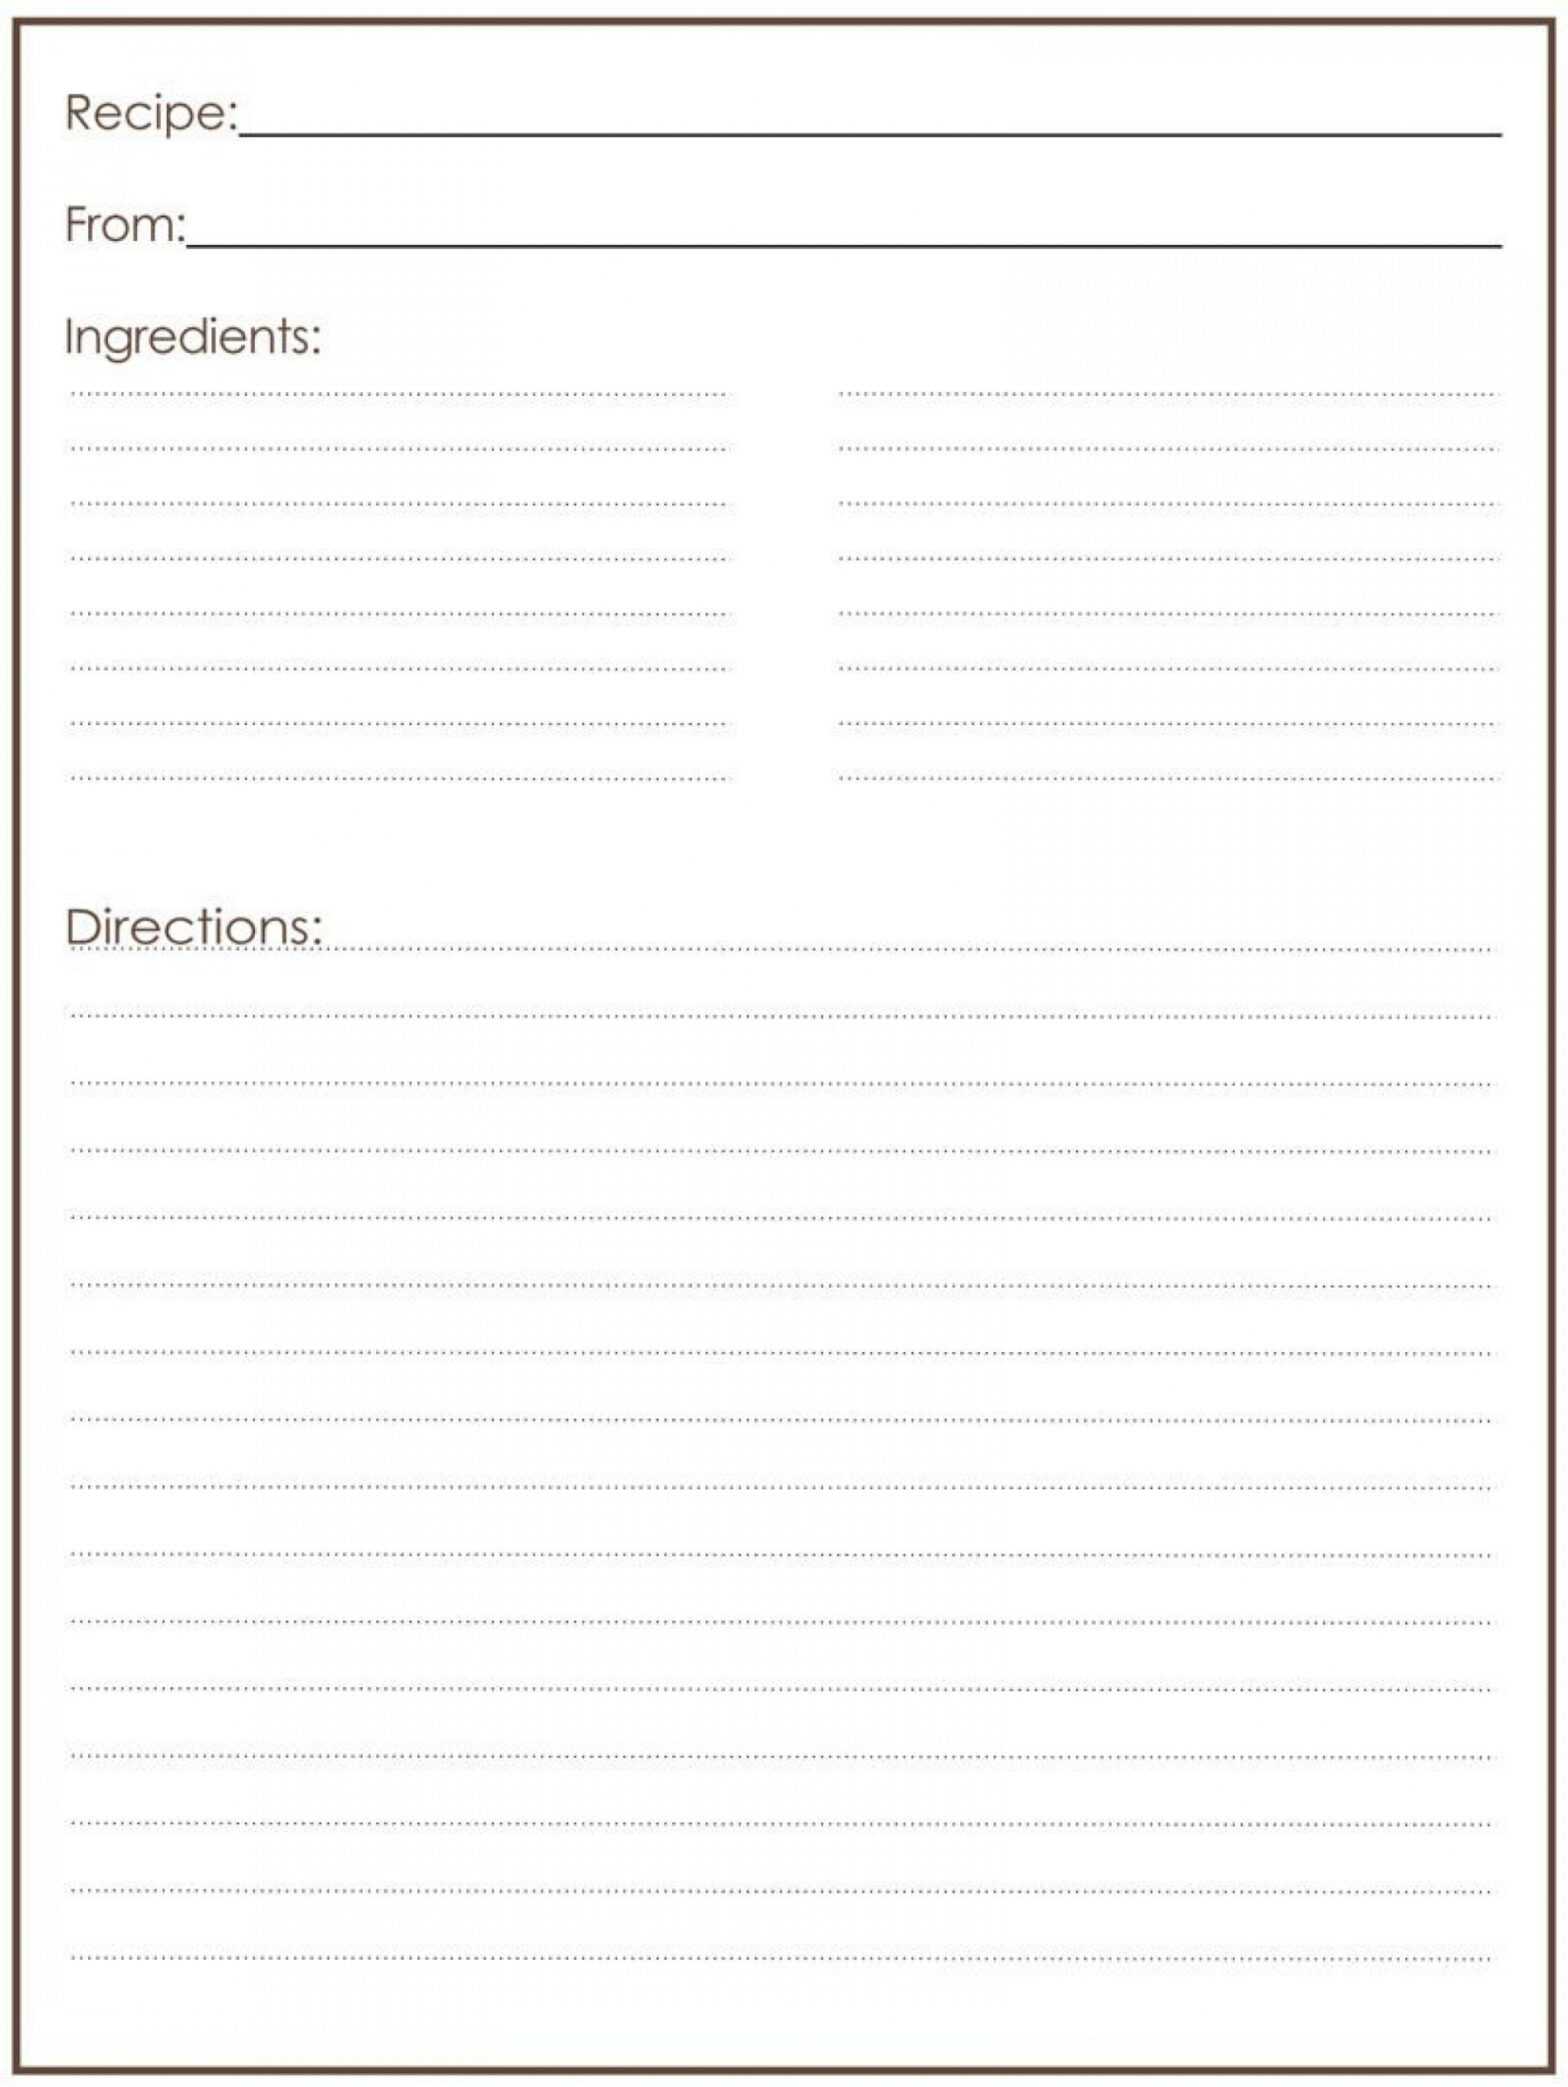 Recipe Template For Word ~ Addictionary throughout Full Page Recipe Template For Word